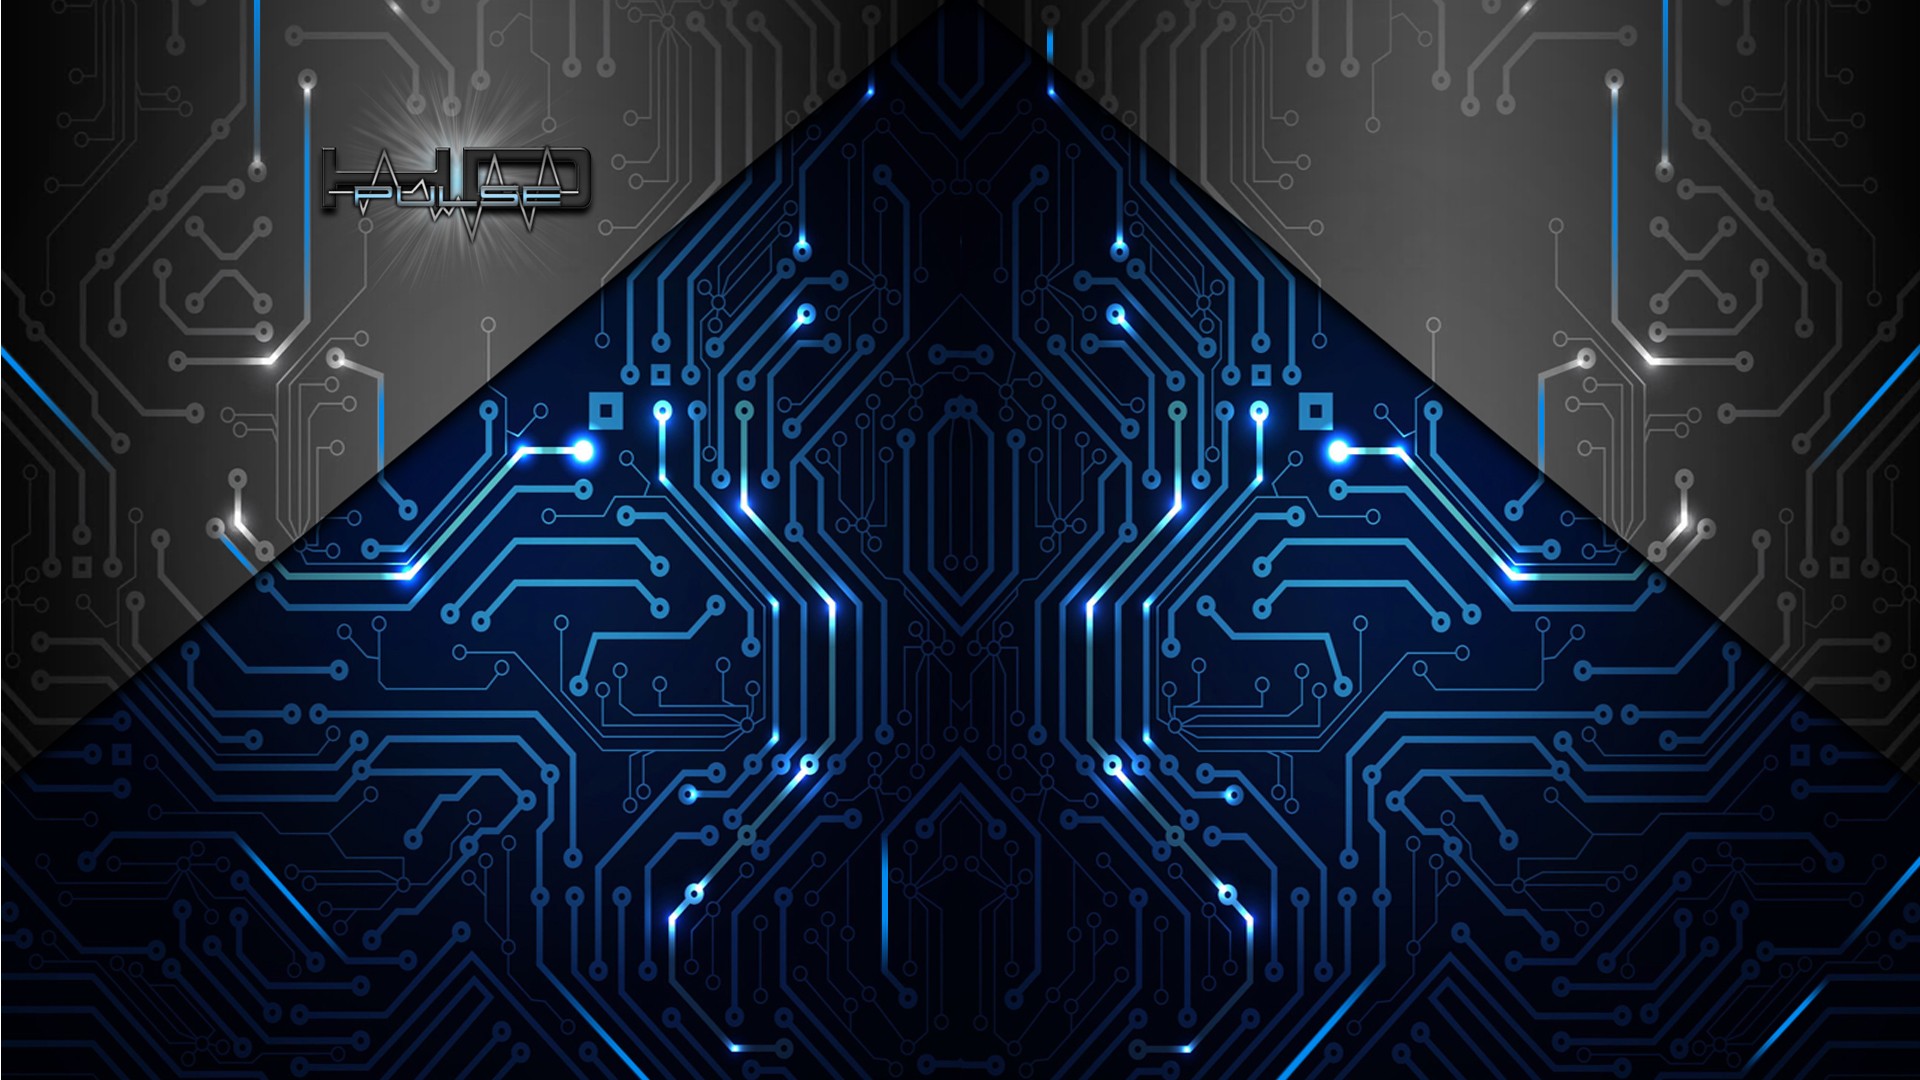 abstract artistic electronics circuit board wallpaper background 1920x1080